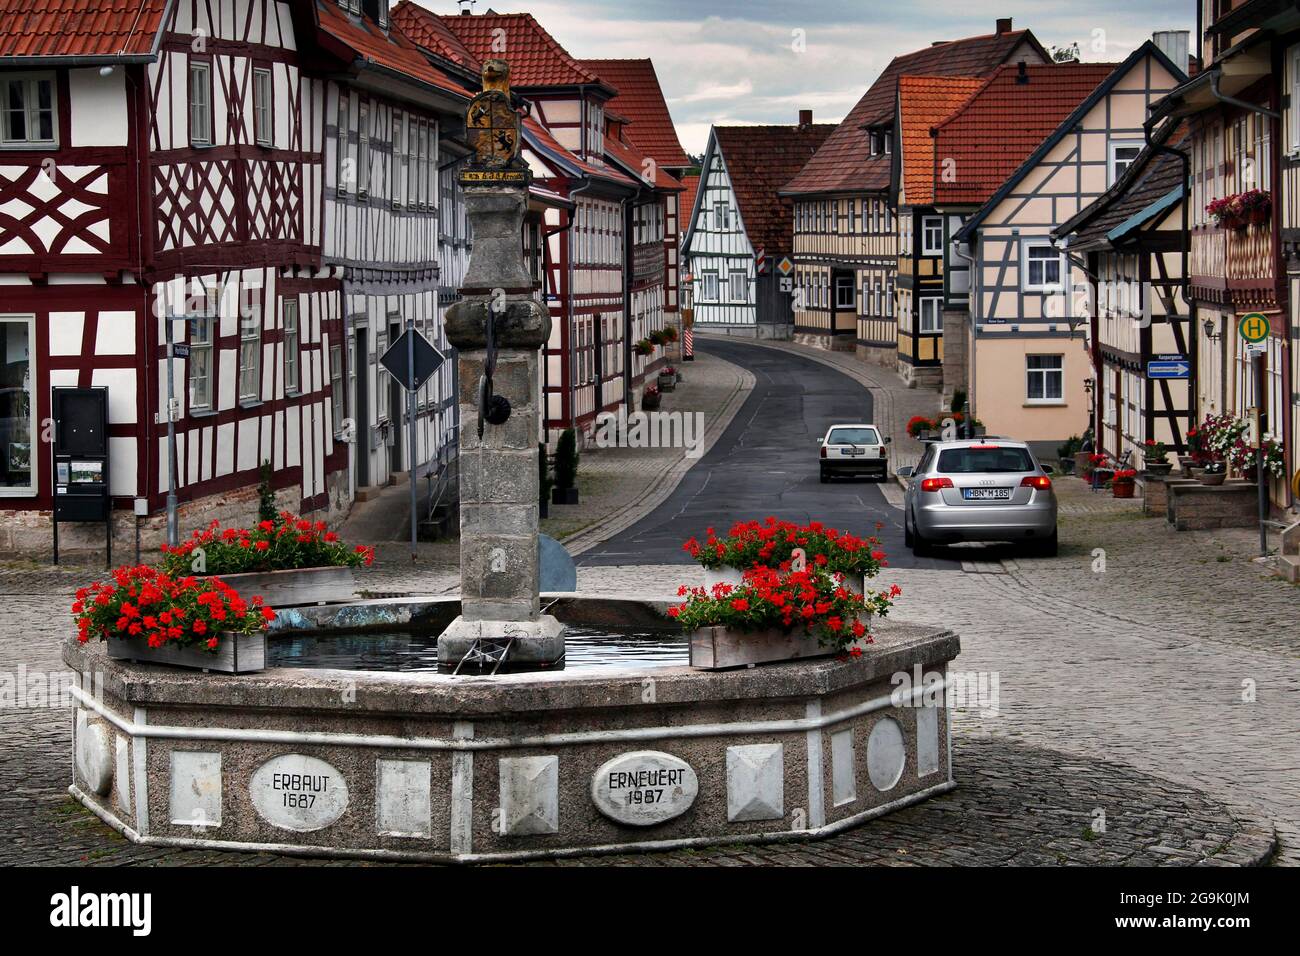 Fountain with golden lion, street with half-timbered houses, medieval town, smallest town in Thuringia, Heldburger Zipfel, Heldburger Land, Green Stock Photo